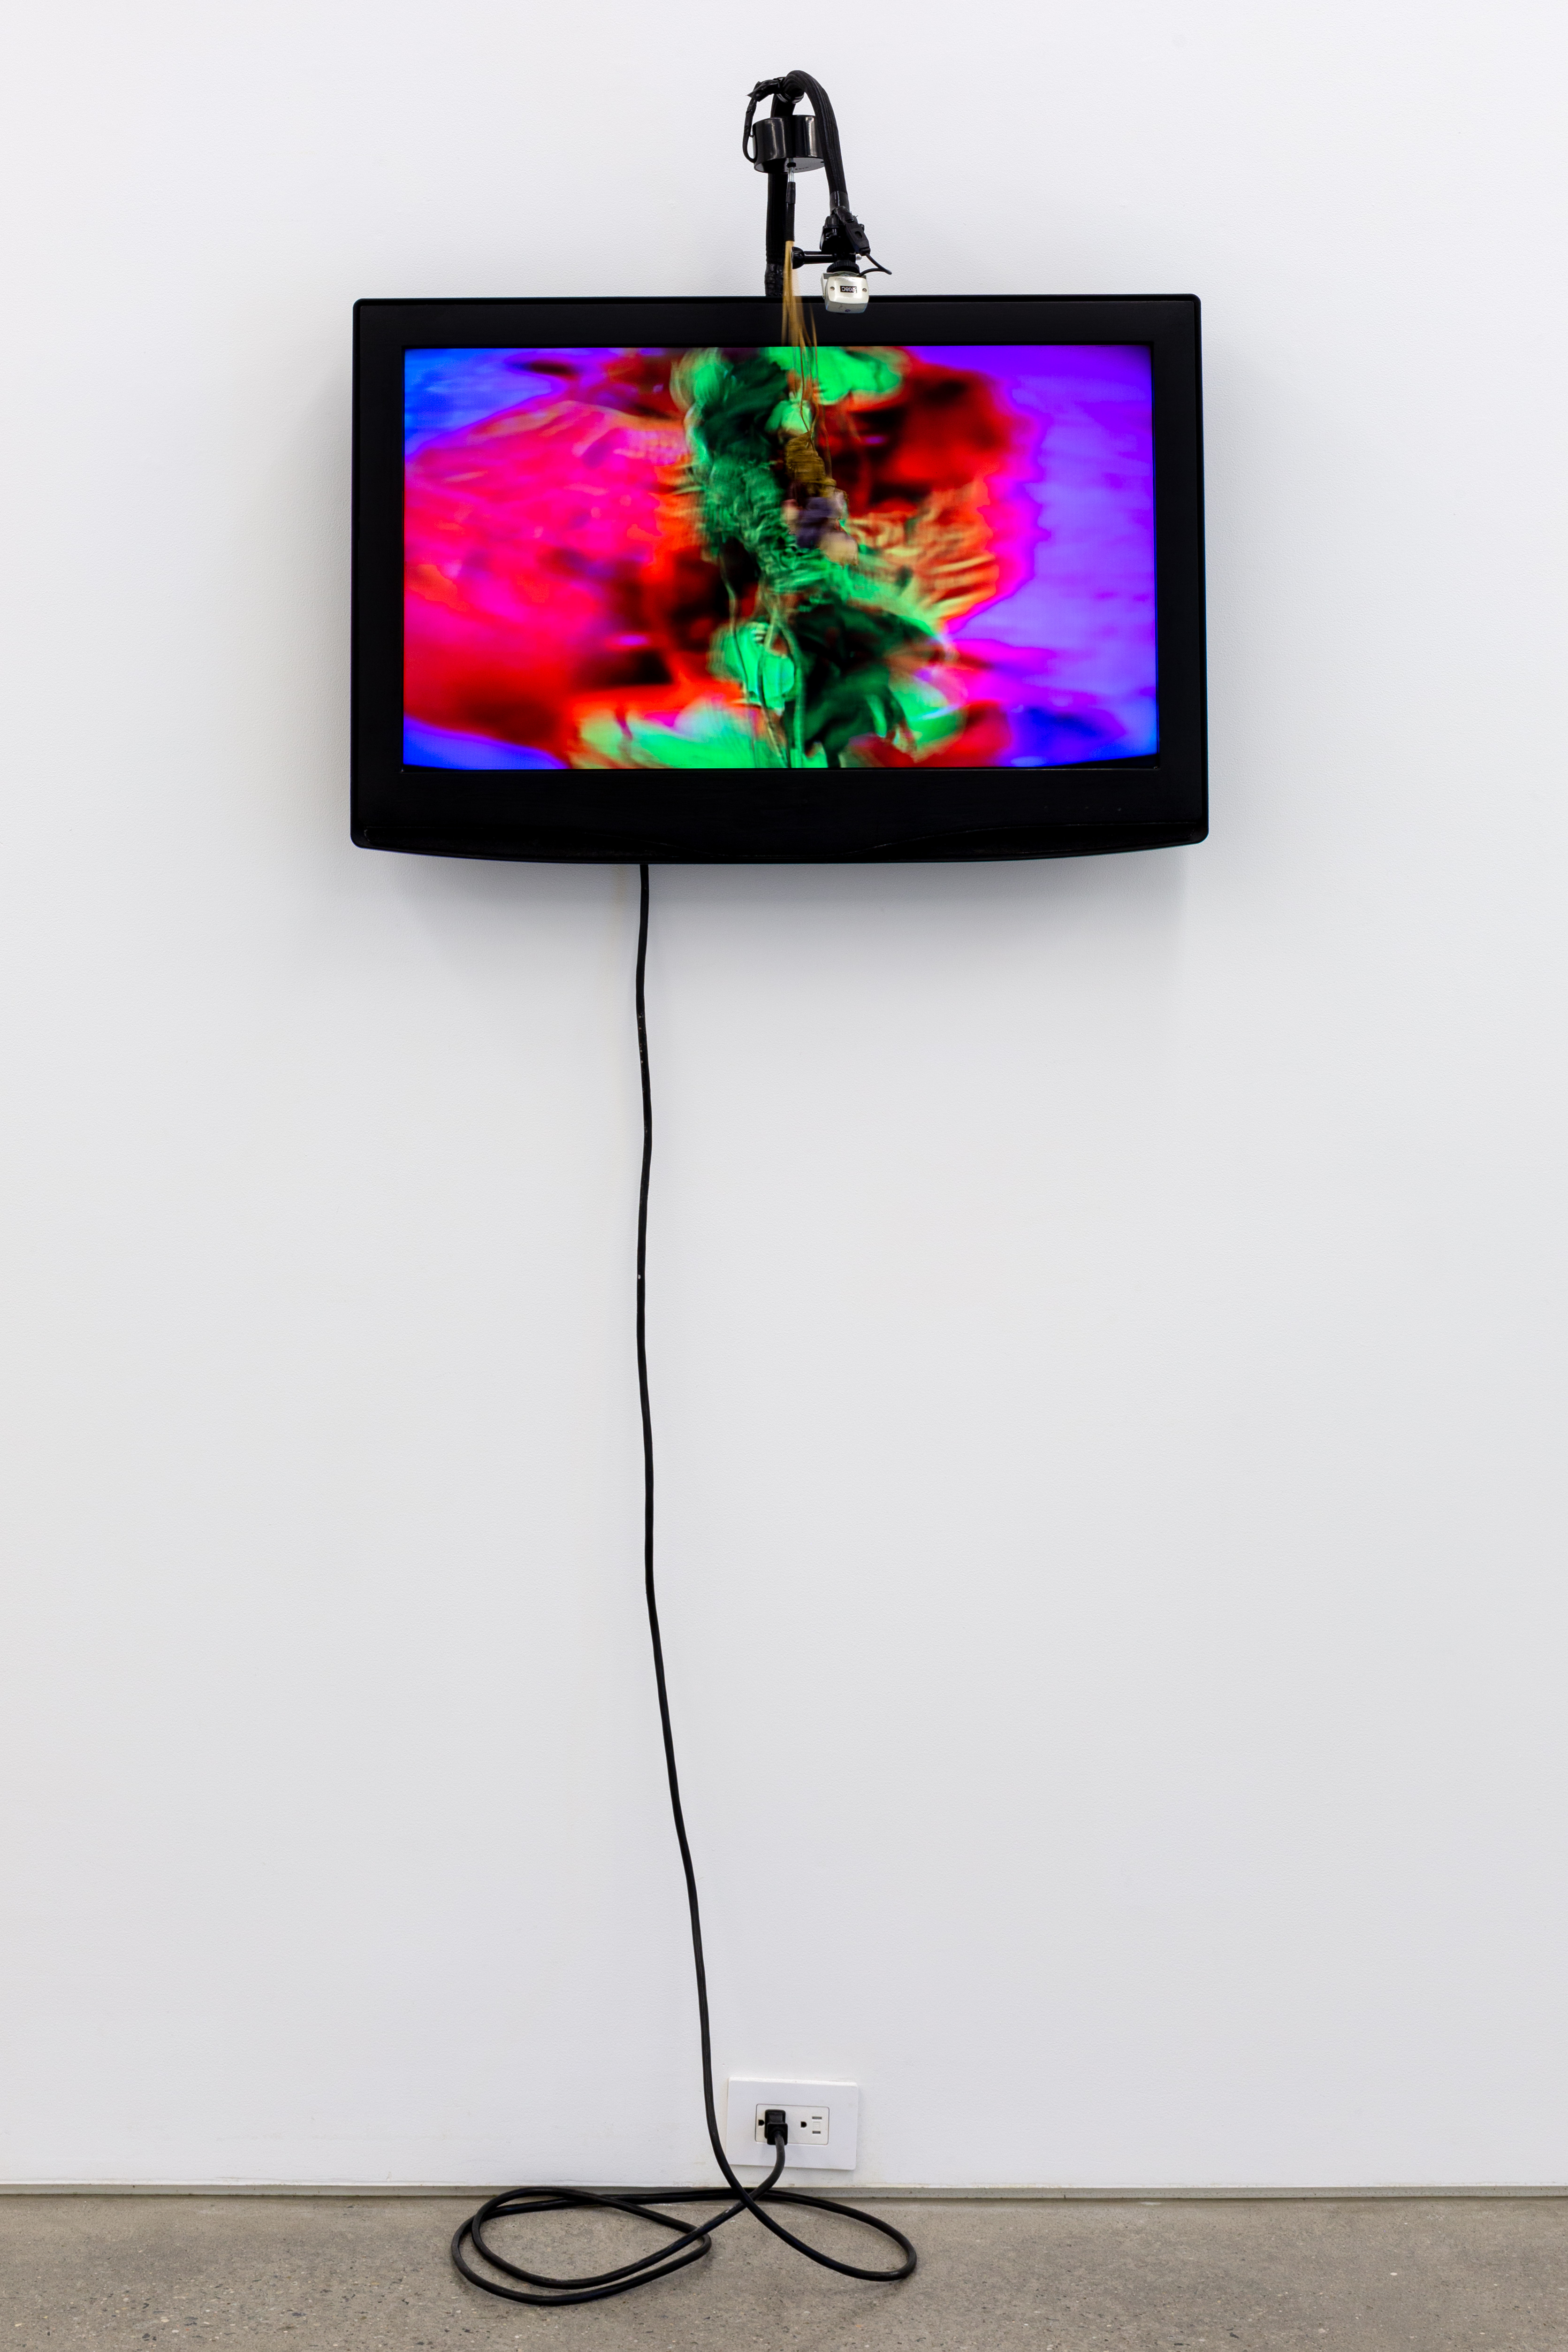 Les LeVeque, Recycling/Upcycled/Feedback #1, 2020, Preserved dried flowers, CCTV camera, flexible camera mount, electric motor, used flat screen
television, spray paint, wires, electrical tape, live video signal, 31h x 29w x 21d in.